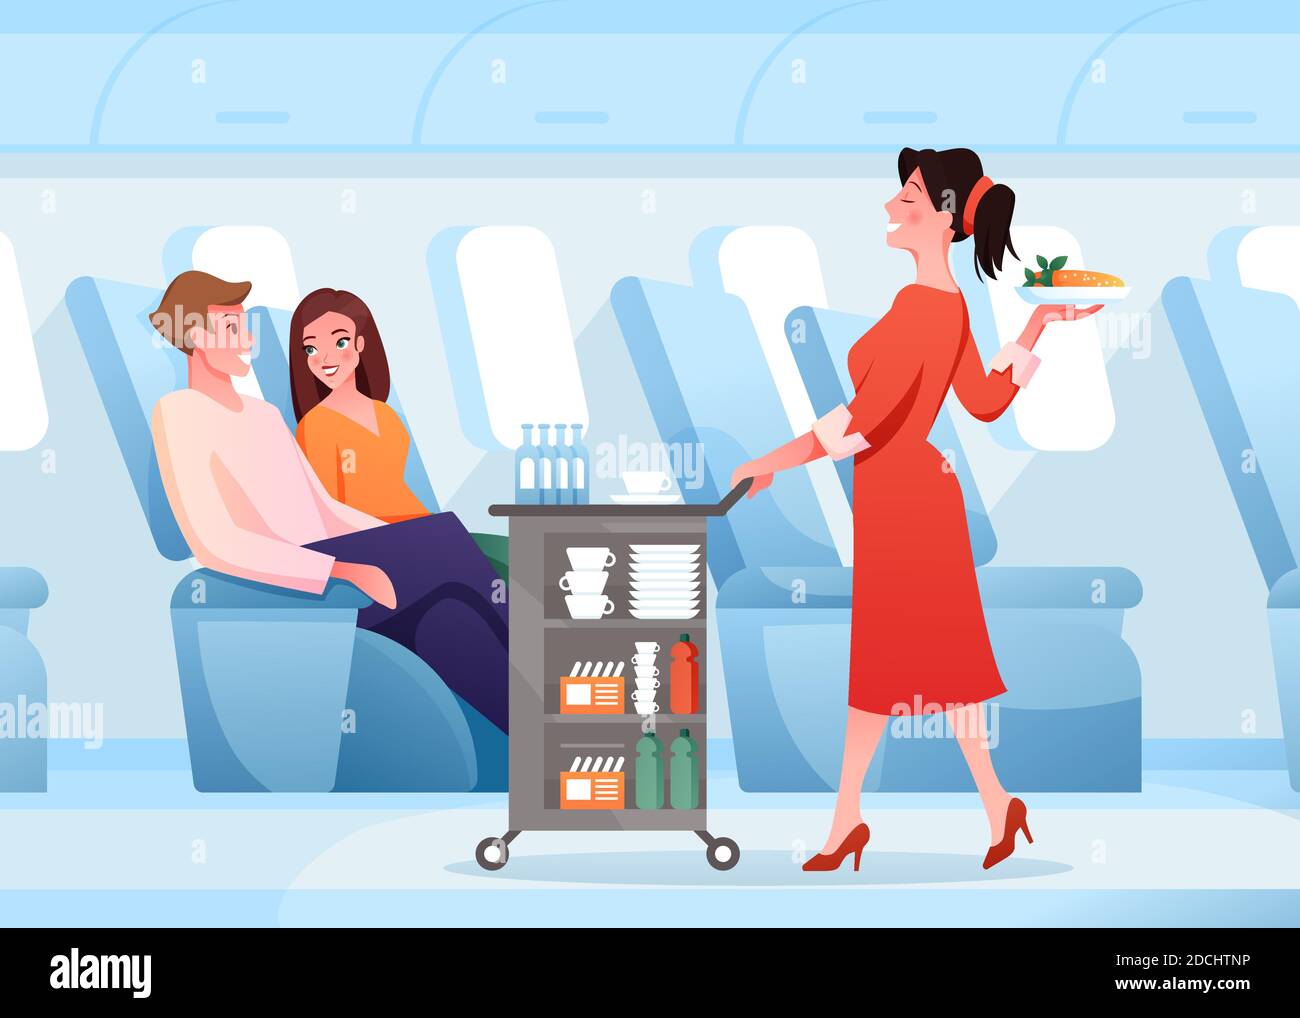 Hospitality service in airplane, cartoon stewardess working, serving passenger couple people Stock Vector